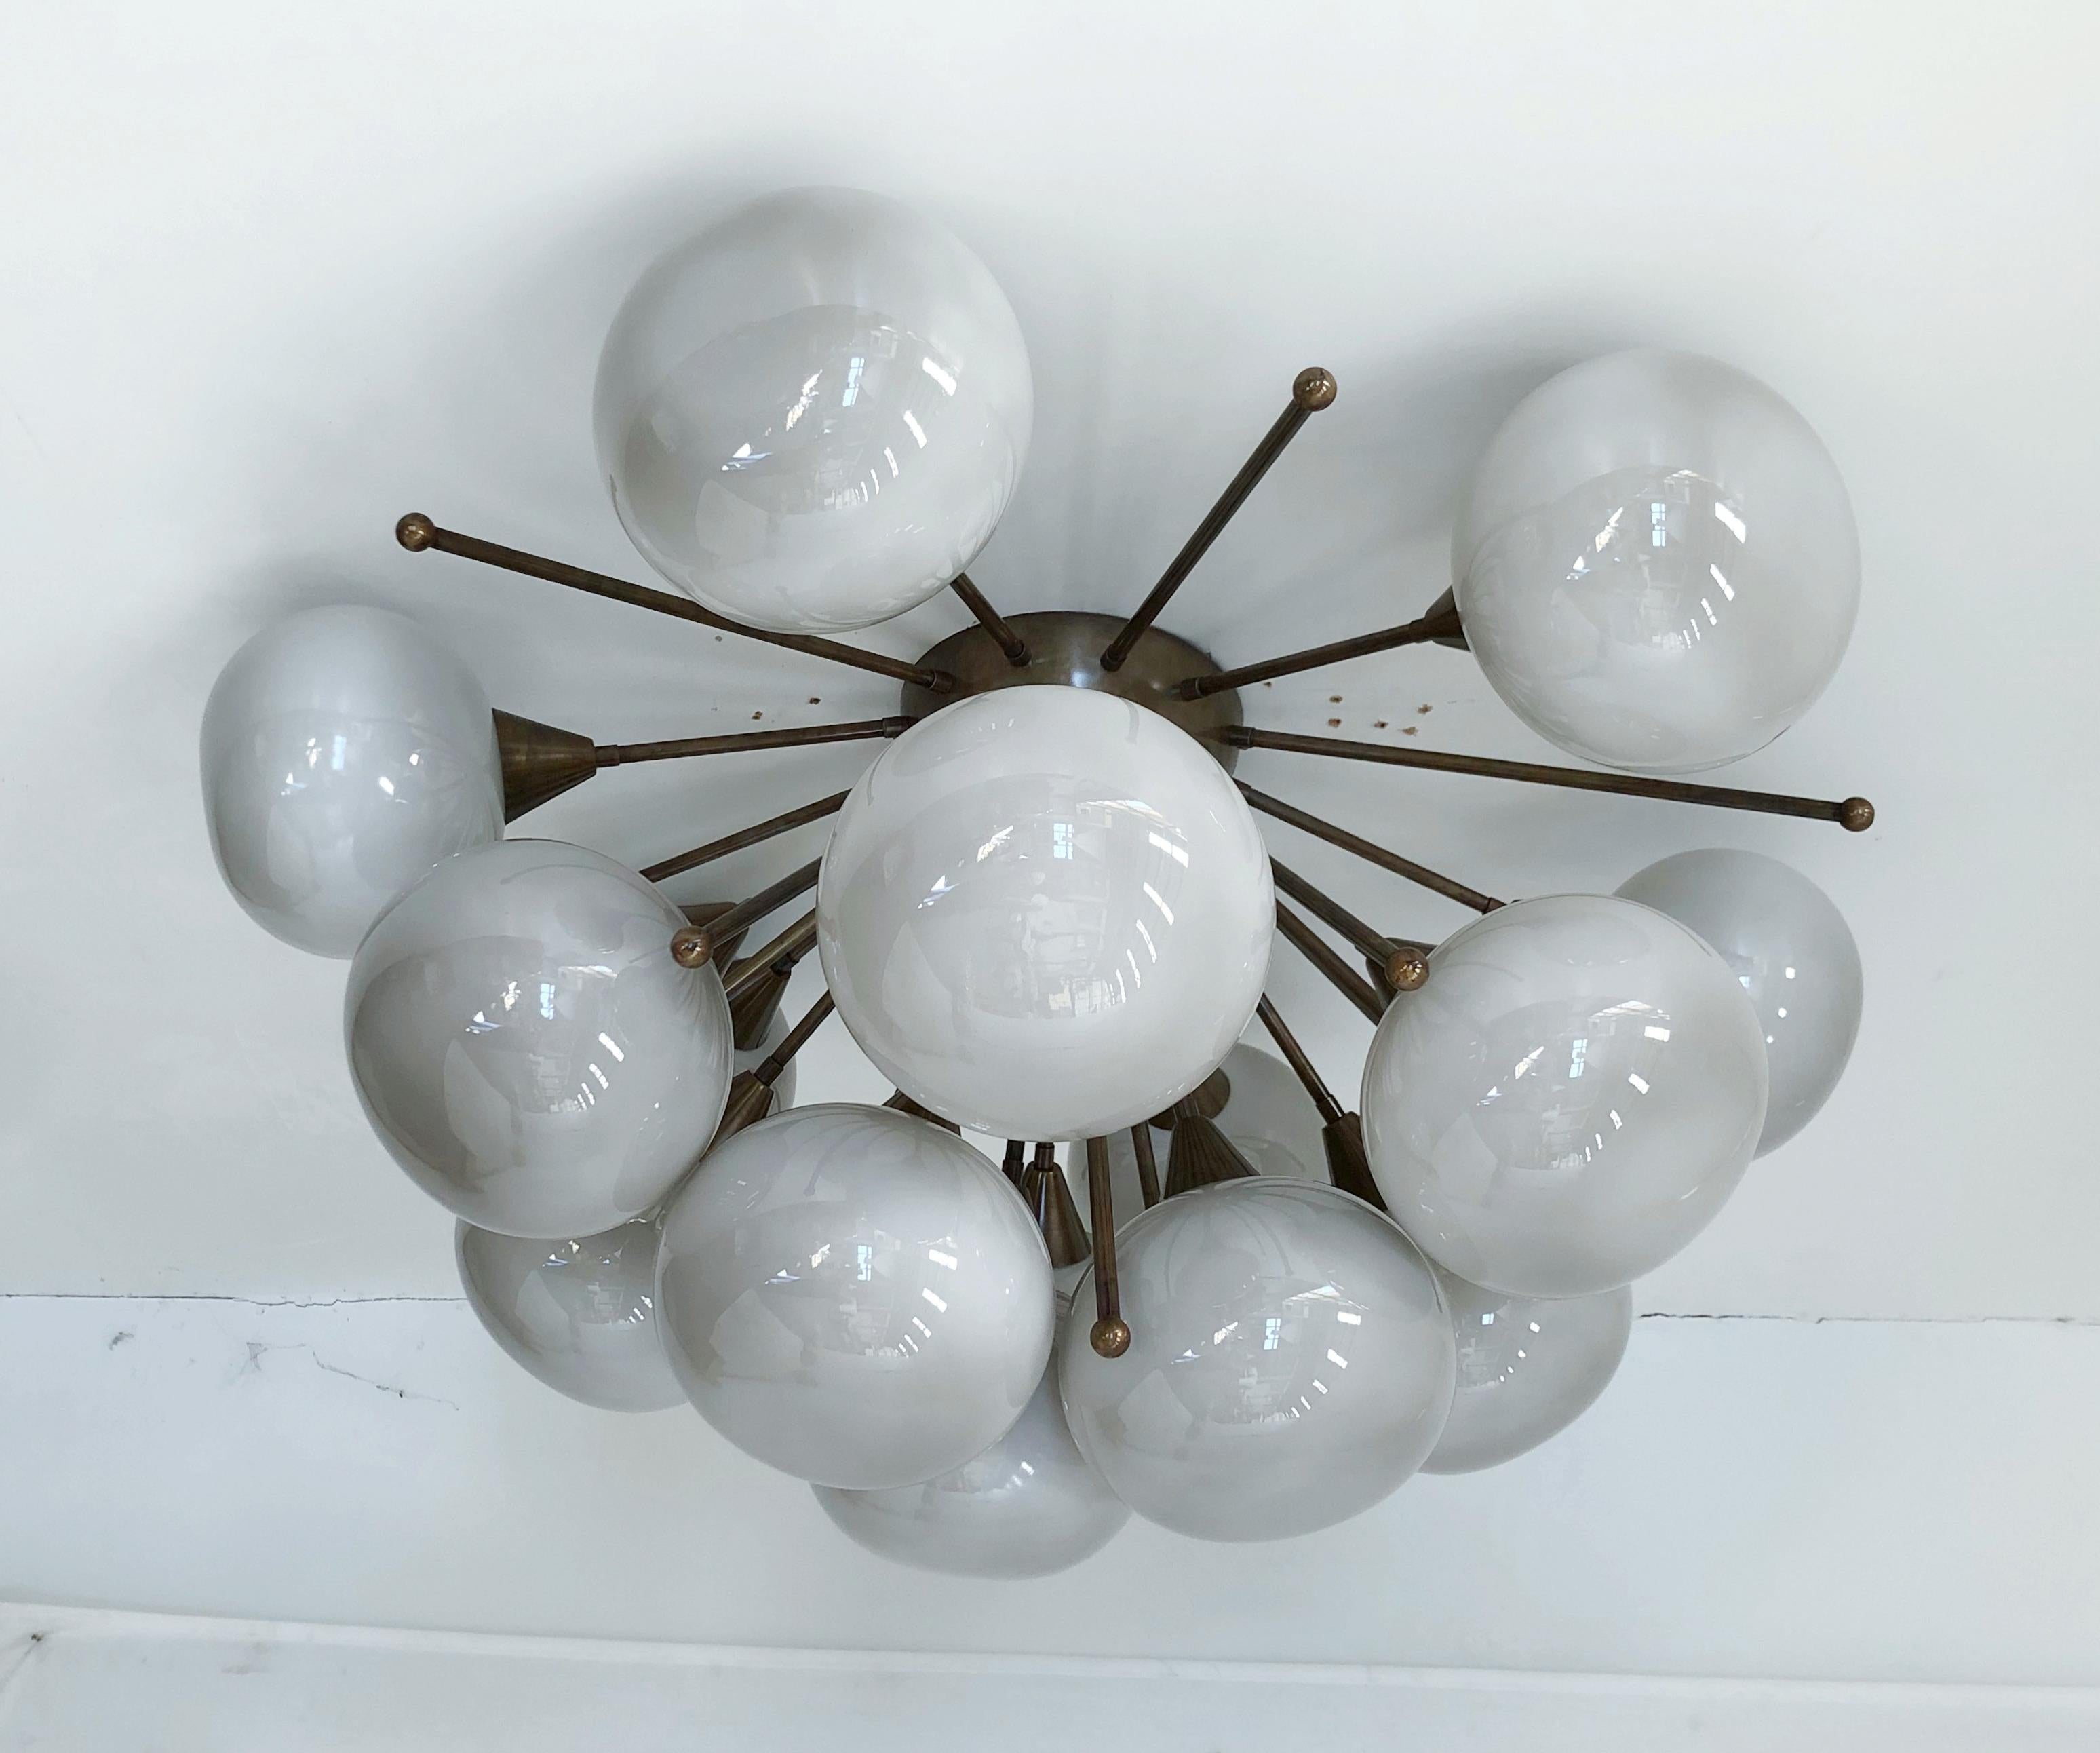 Italian Sputnik flush mount with gray Murano pebble glass shades mounted on solid brass frame / Designed by Fabio Bergomi for Fabio Ltd / Made in Italy
15 lights / E12 or E14 type / max 40W each
Measures: Diameter 35.5 inches, height 18 inches
Order